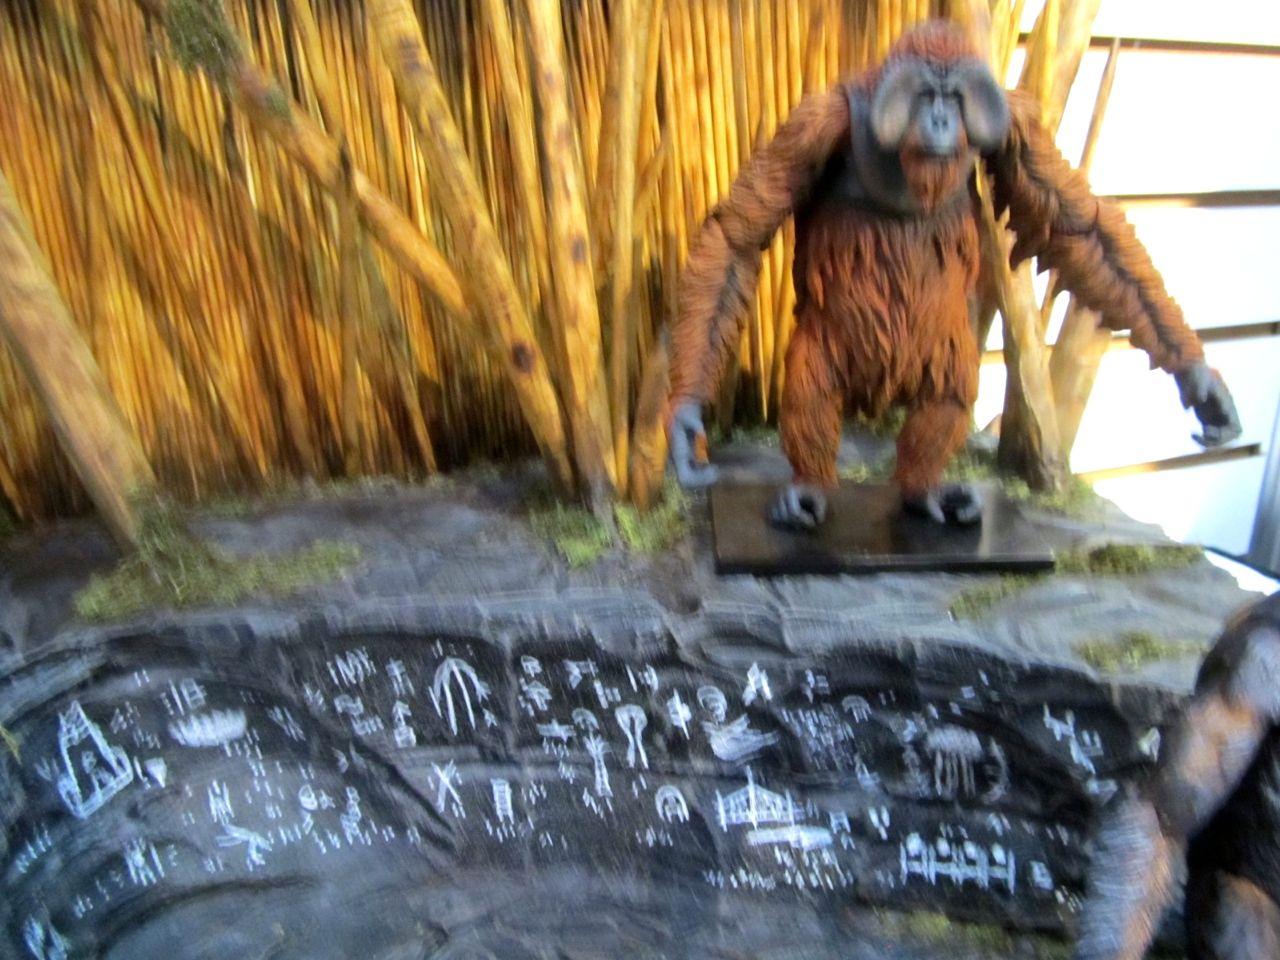 hr_neca_dawn_of_the_planet_of_the_apes_7